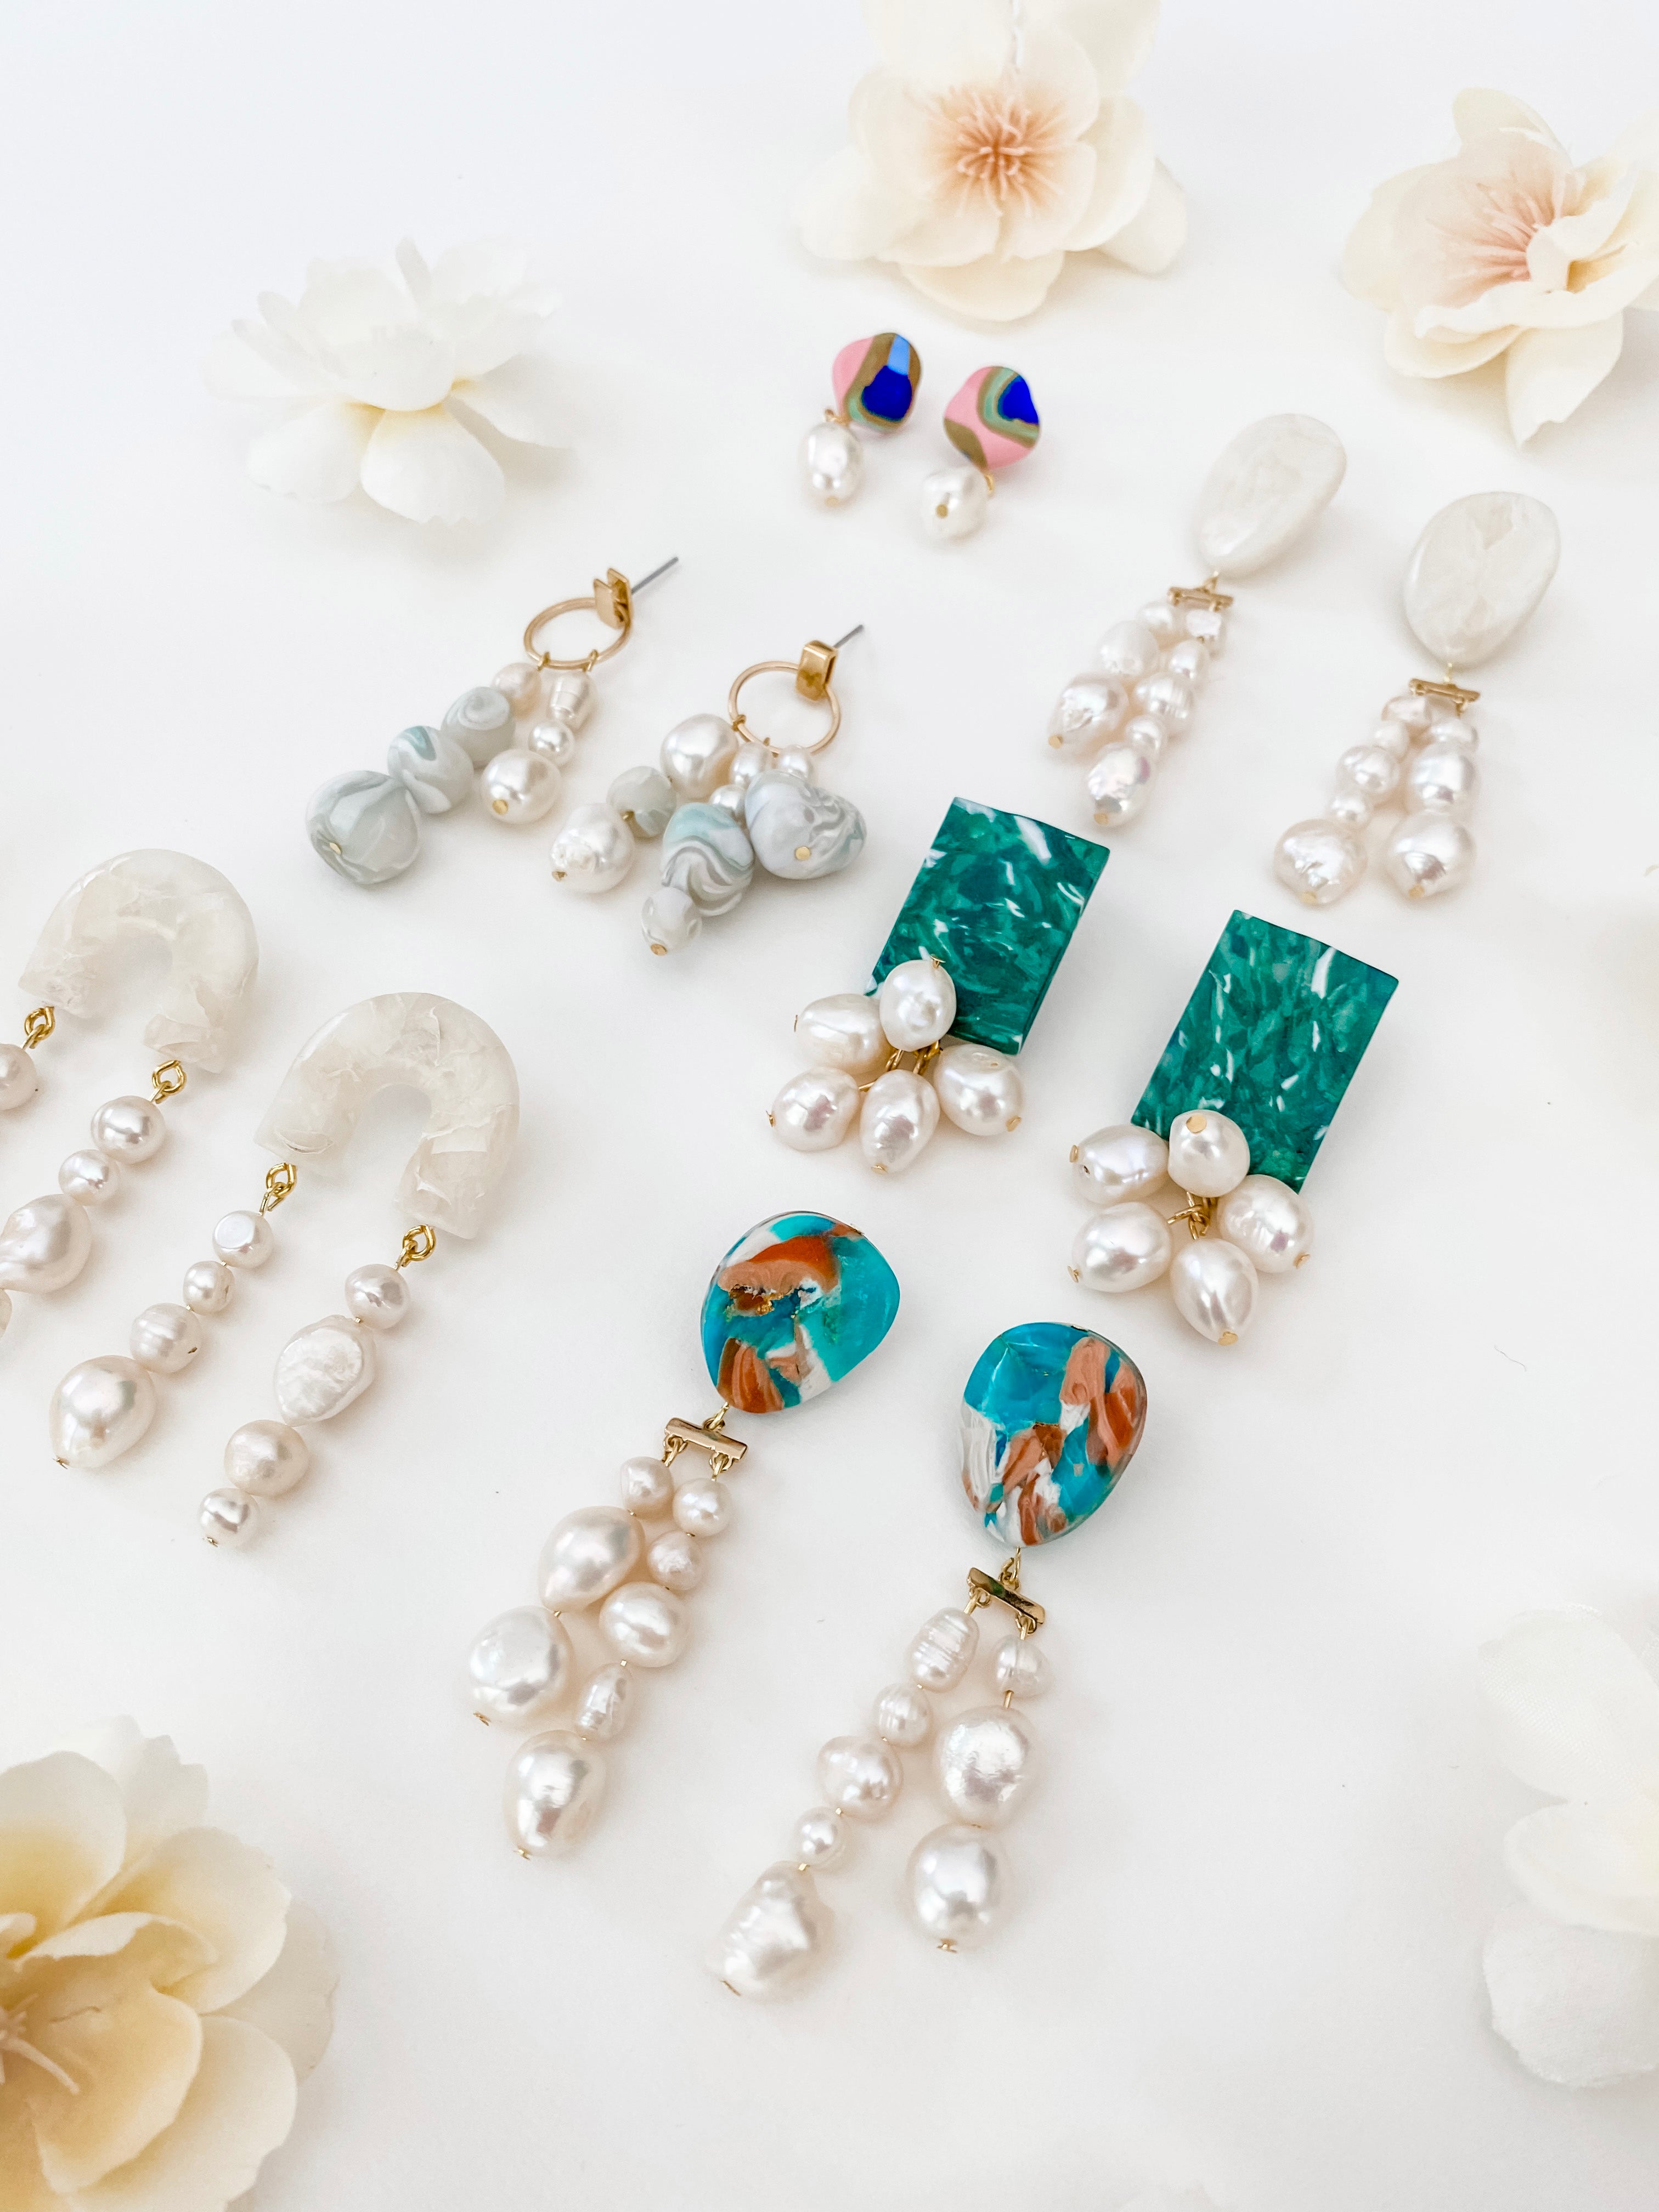 Pearls, our latest obsession